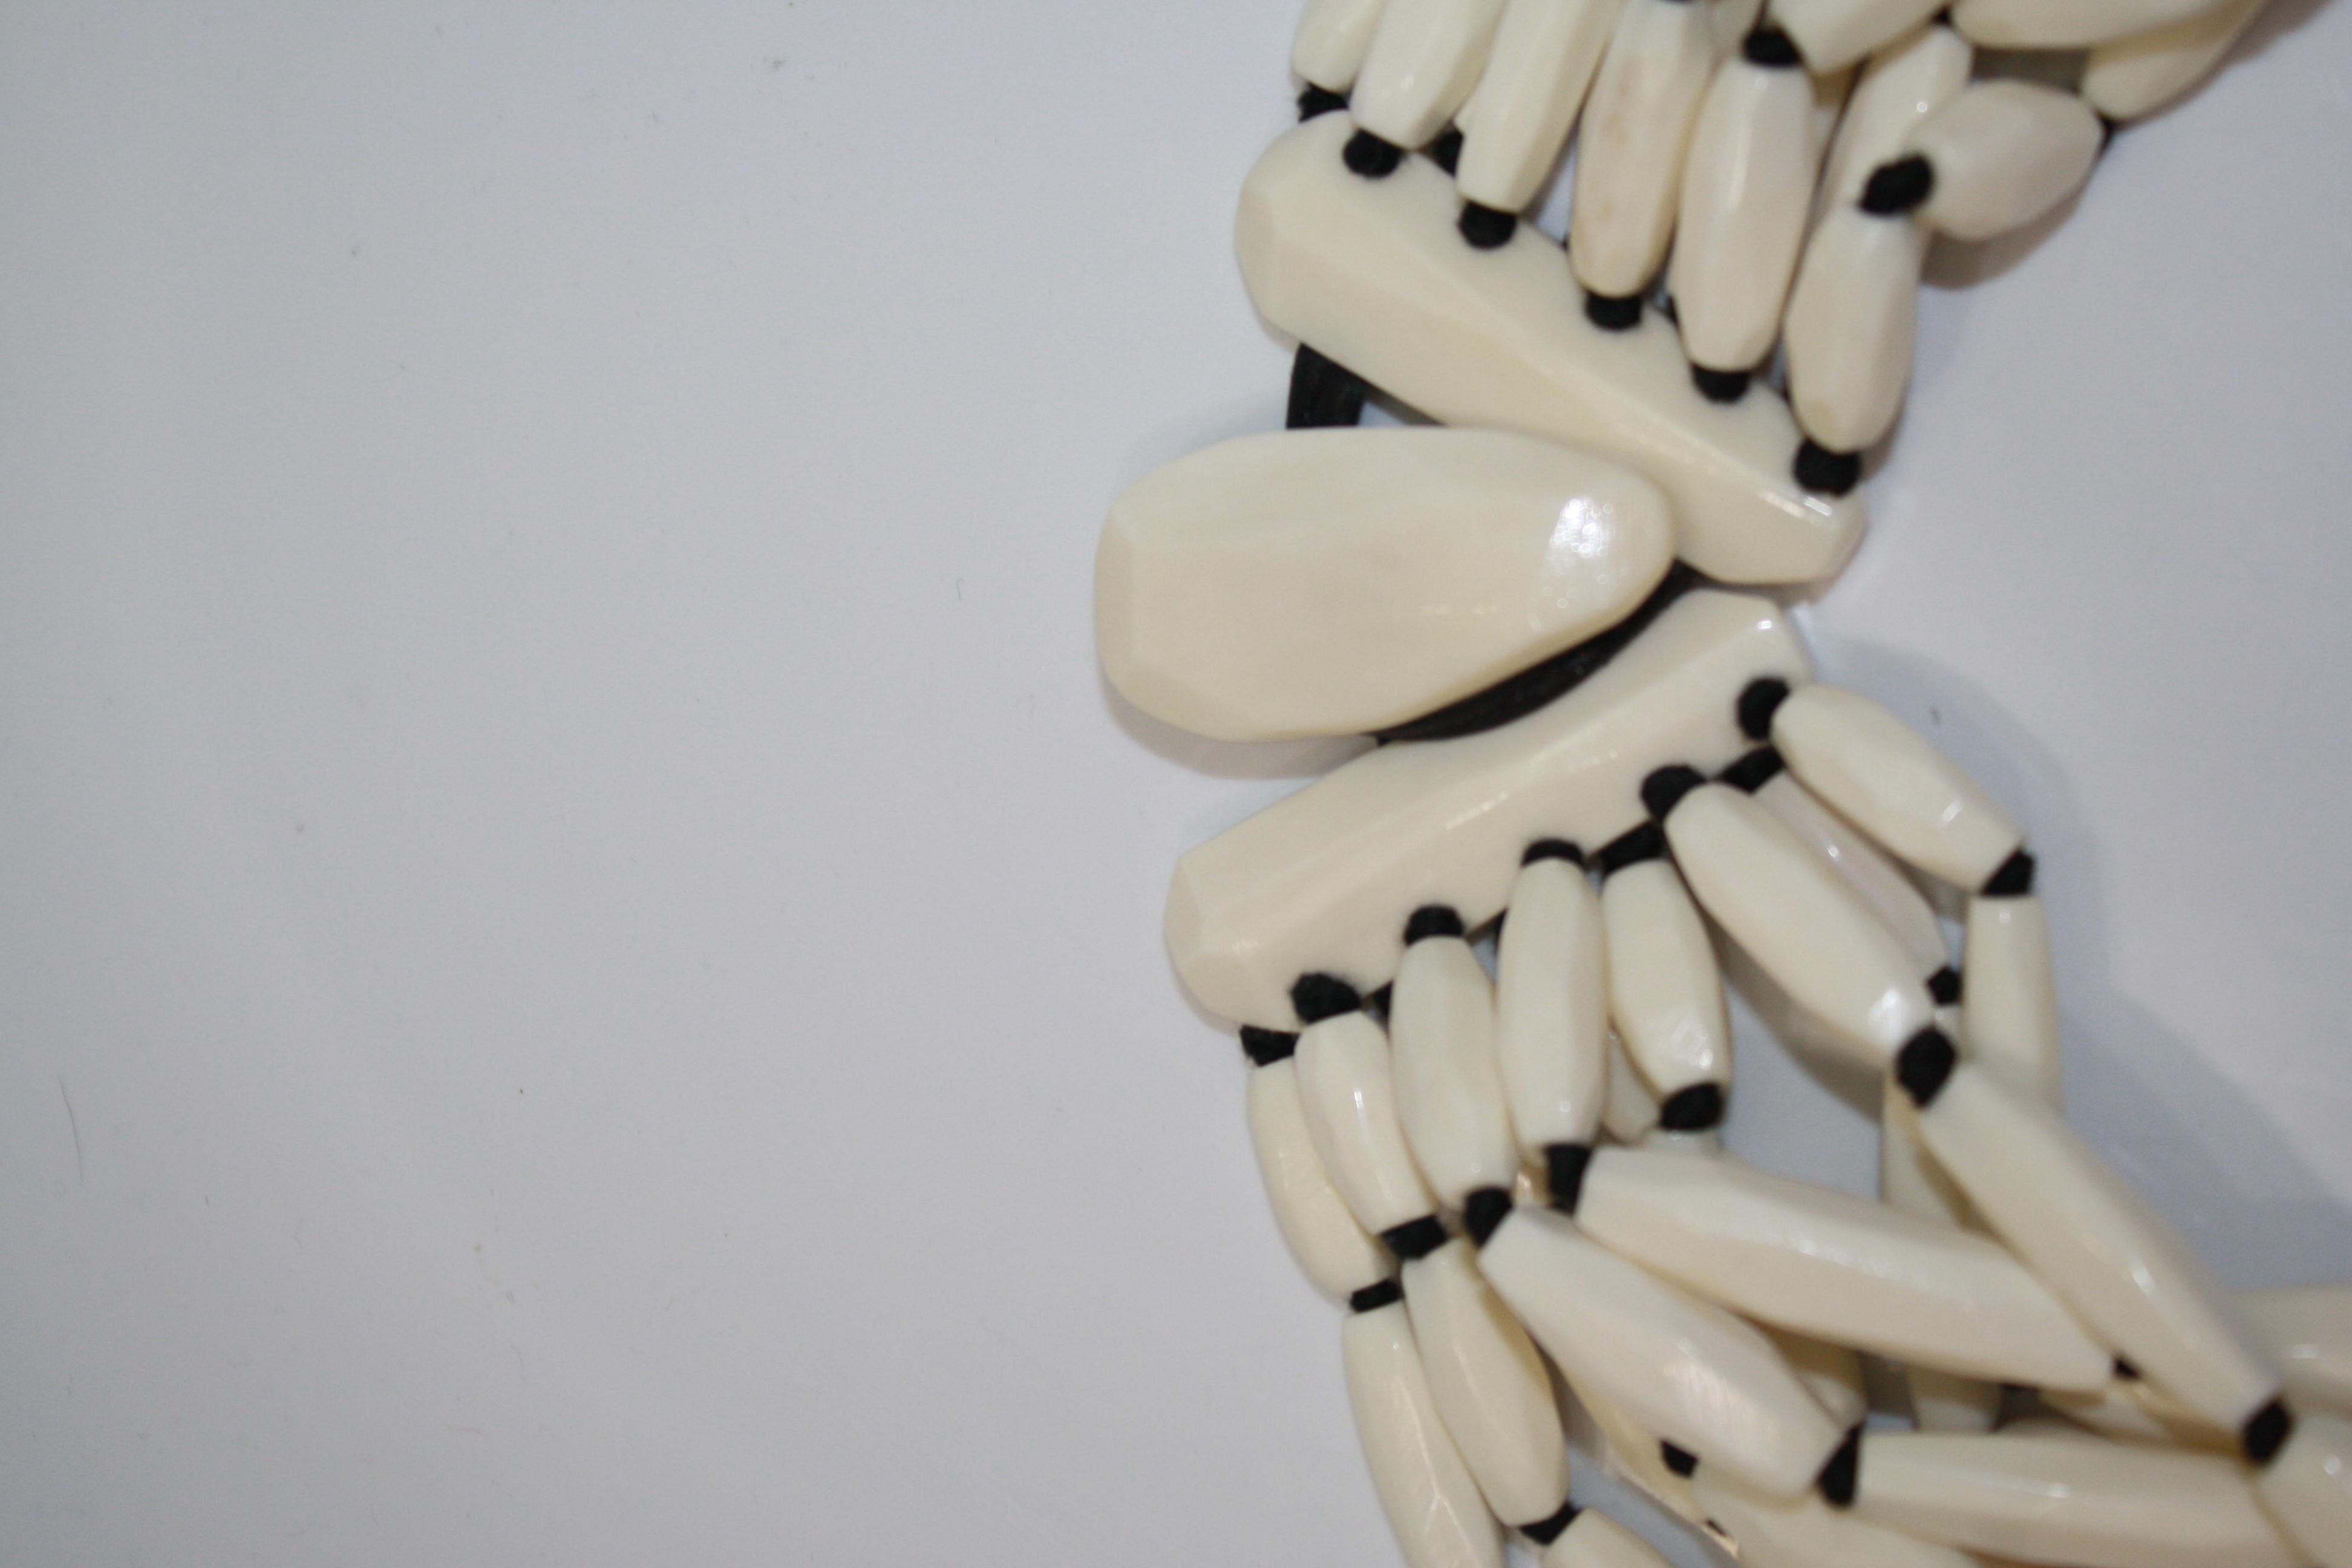 10 strands of oblong bone beads threaded through with a leather strand. Hook and eye clasp.
signature on clasp